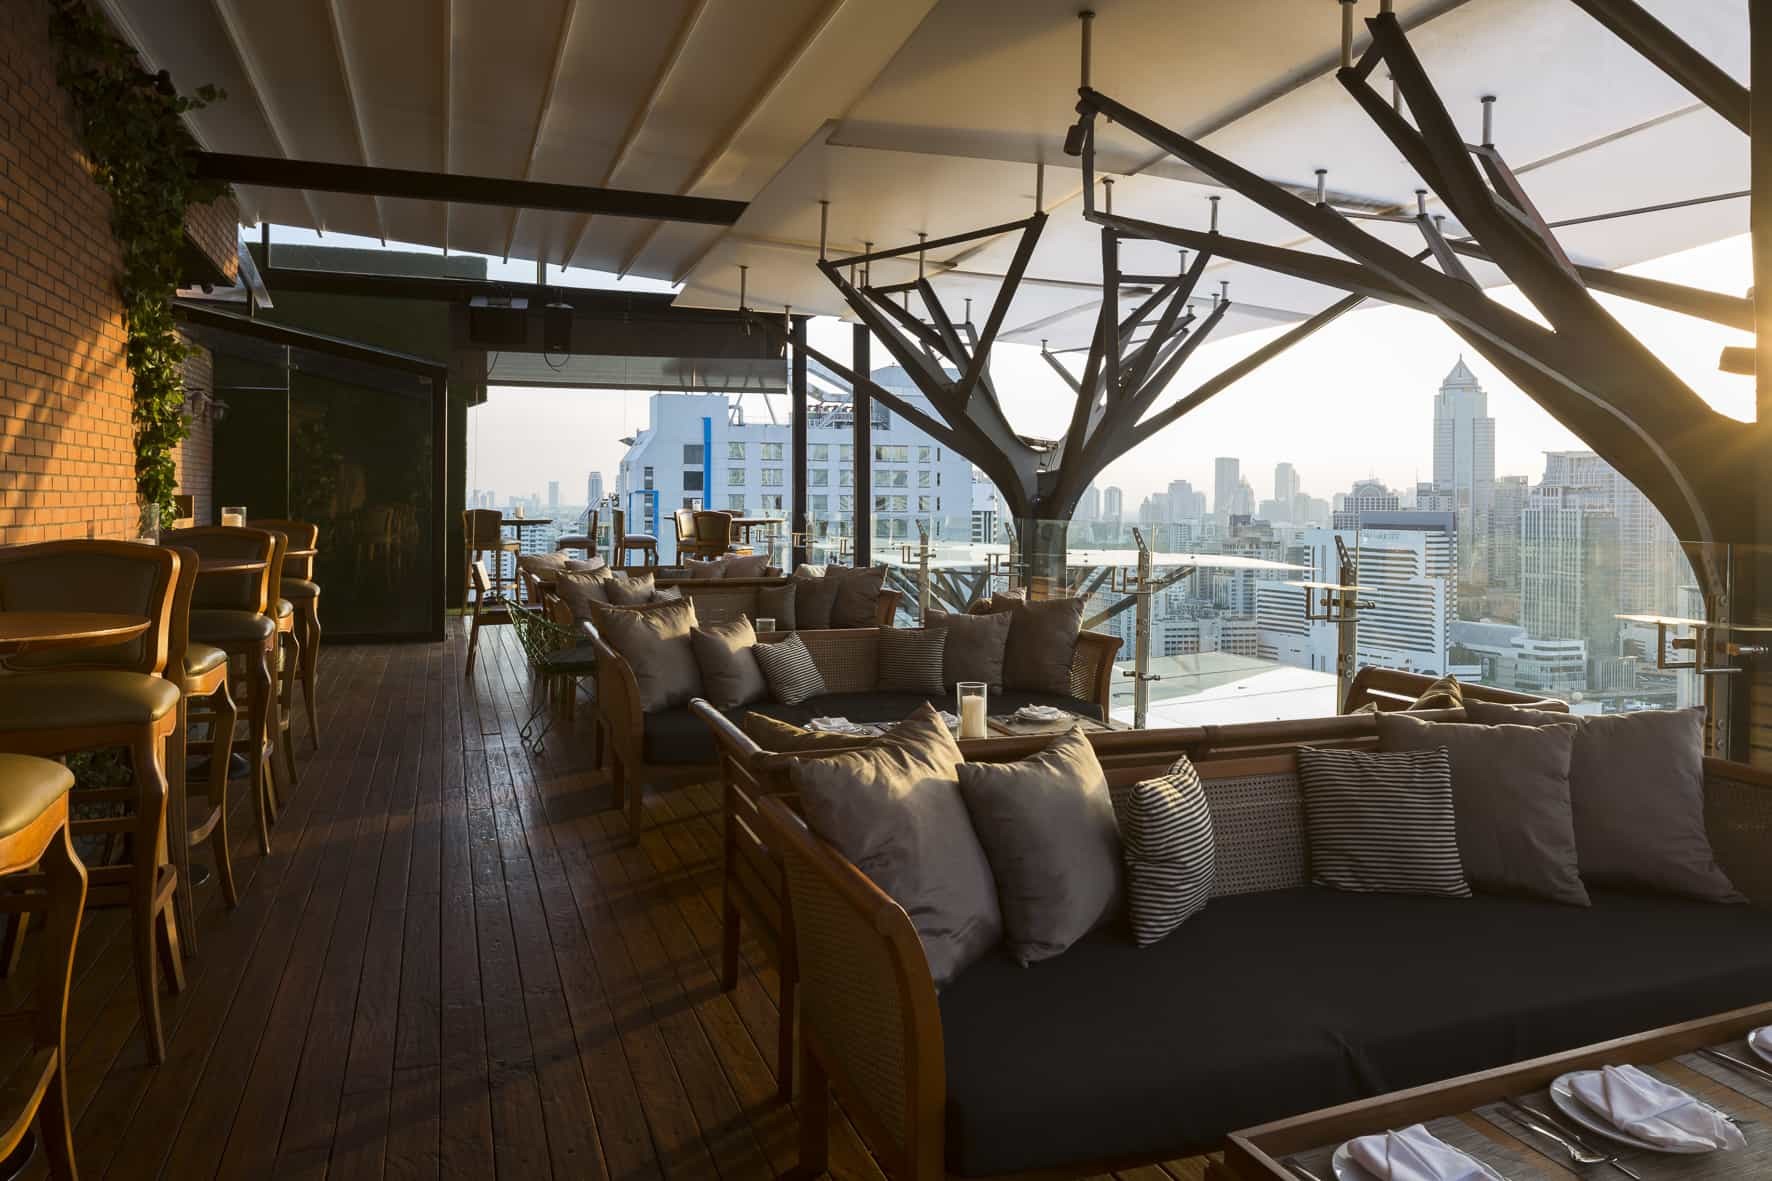 Above Eleven, which offers stunning views of the Thai capital, Bangkok.